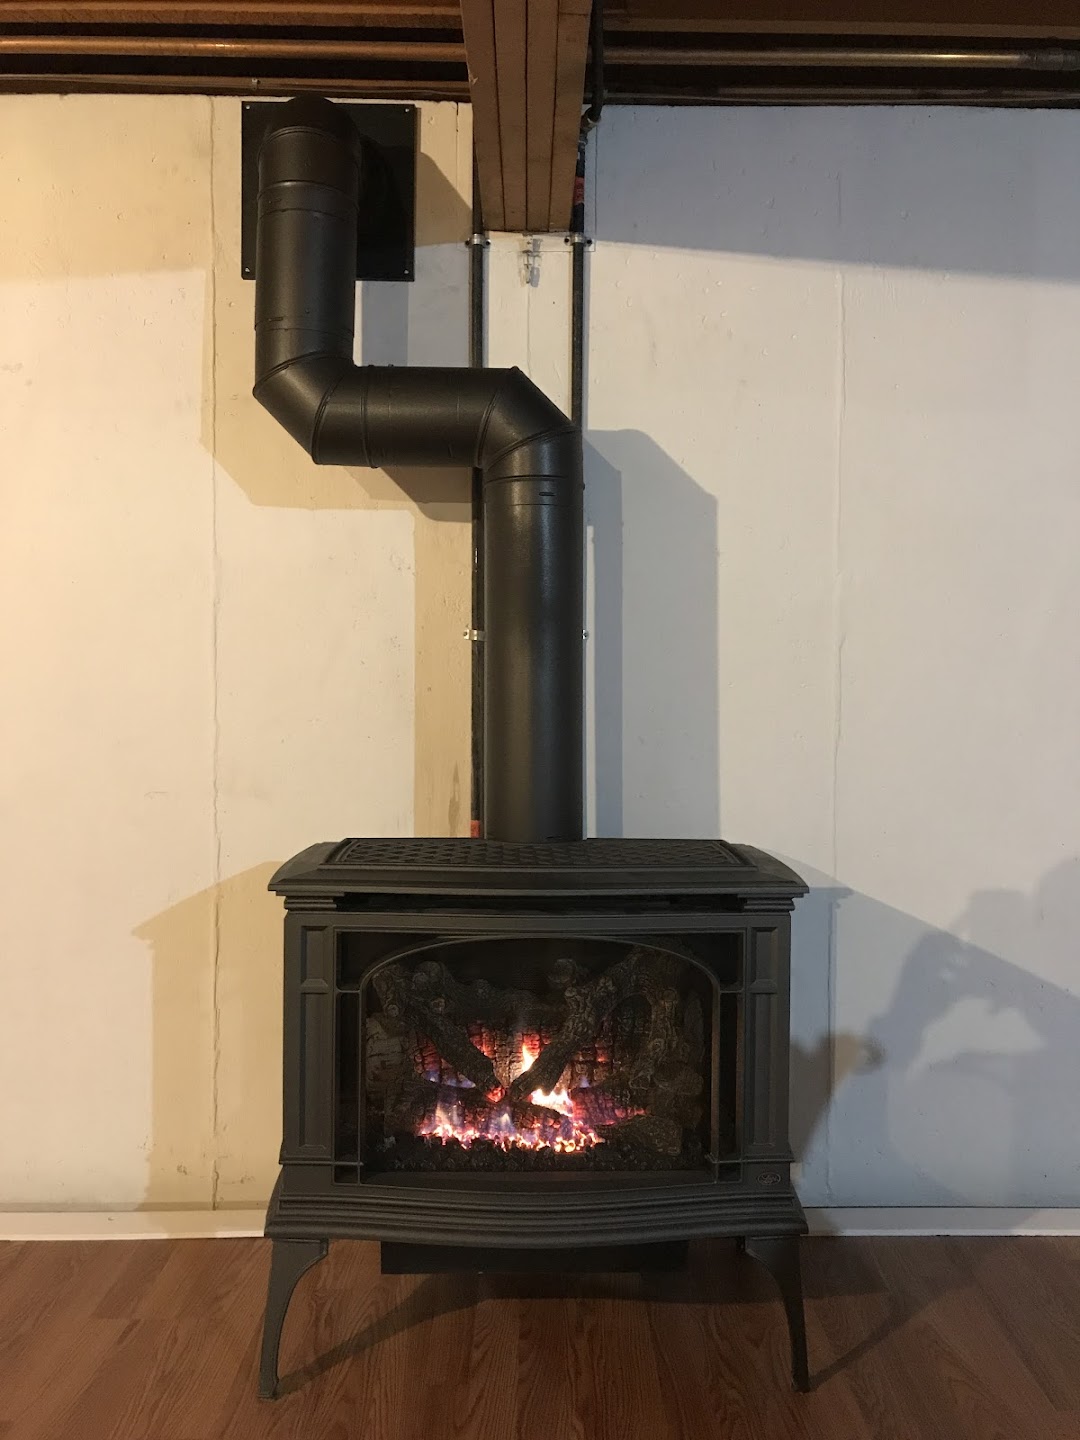 North Country Hearth & Home